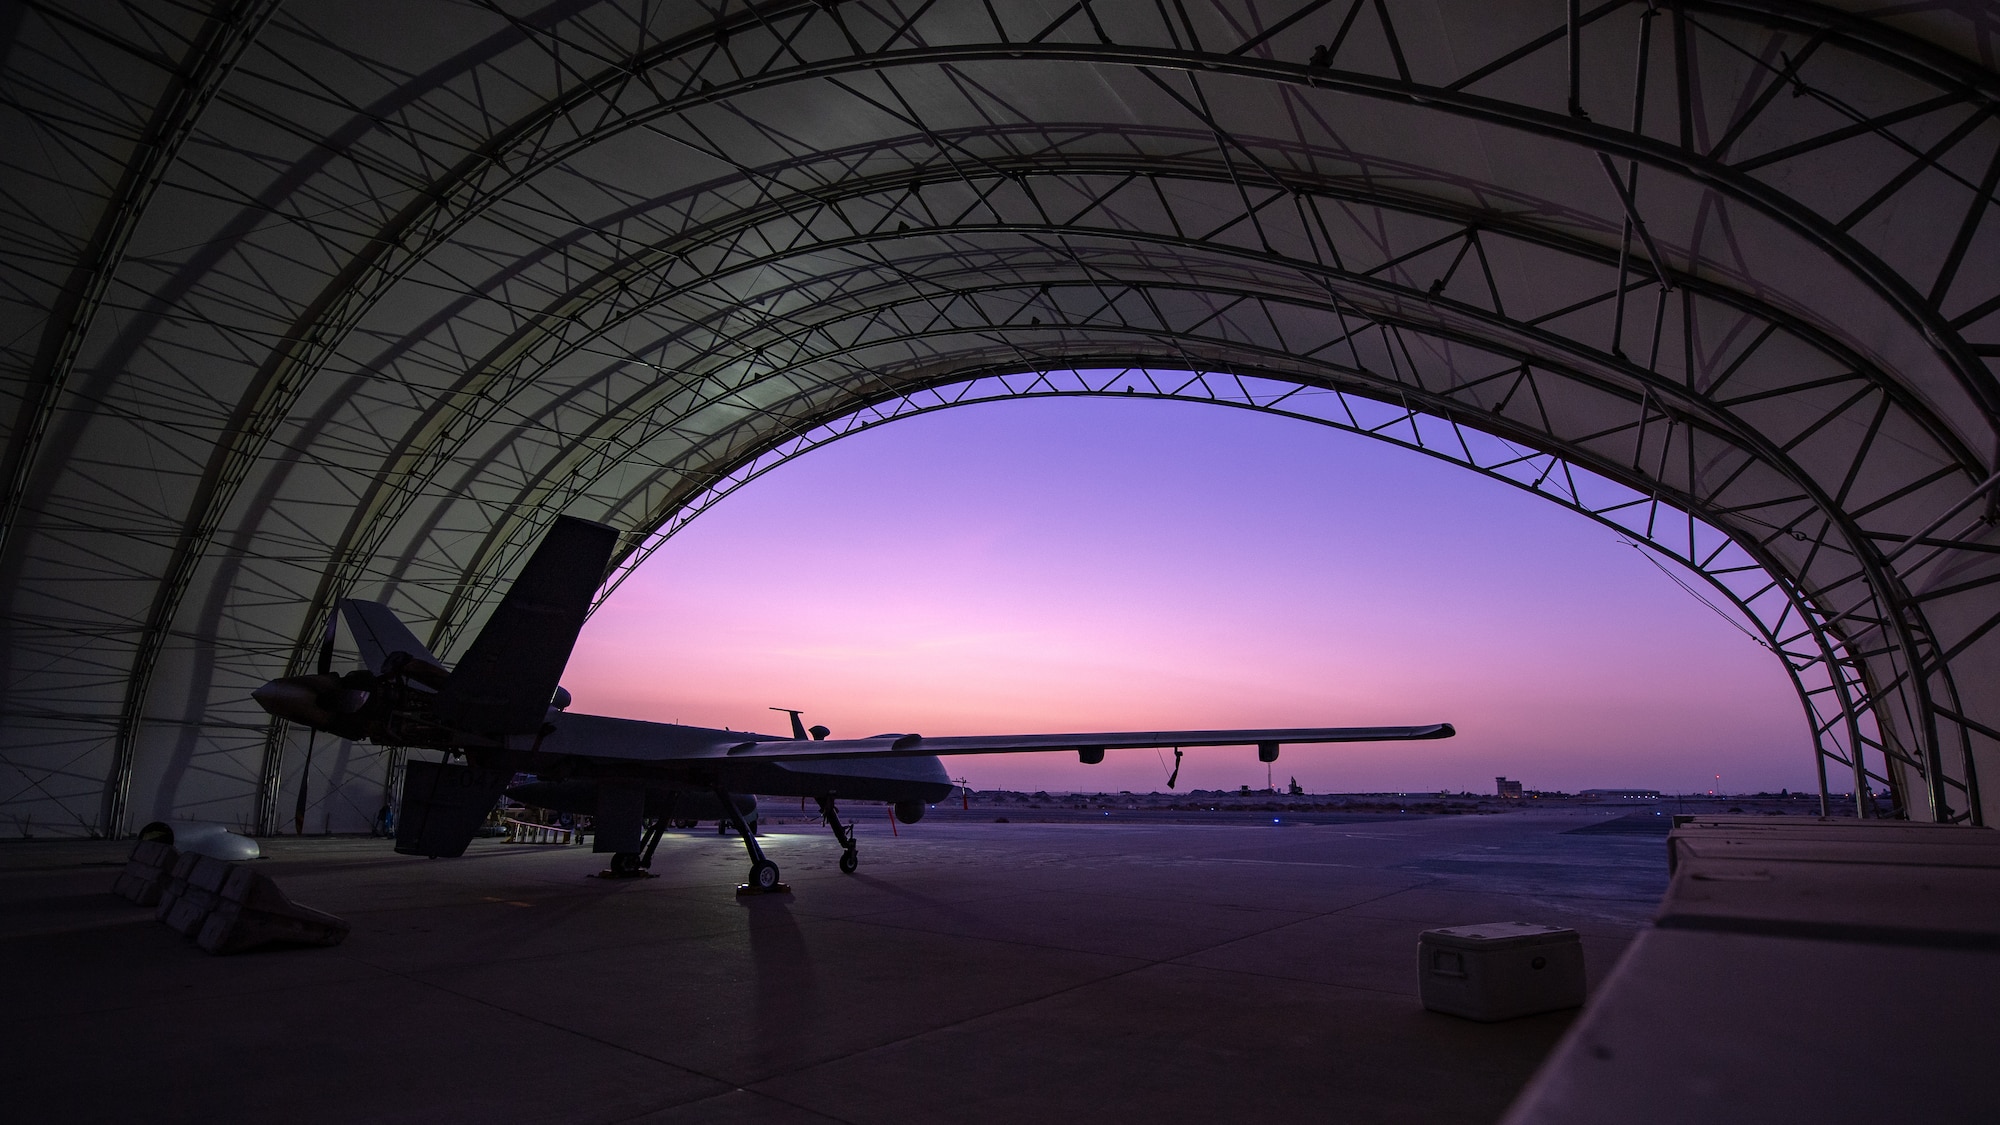 A U.S. Air Force MQ-9 Reaper remotely piloted aircraft awaits an engine test prior to Intelligence, Surveillance, and Reconnaissance operations at Ali Al Salem Air Base, Kuwait, July 23, 2019. Reaper’s are maintained, launched and recovered from deployed locations, but are remotely operated from bases in the United States during ISR operations around the world. (U.S. Air Force Photo by Tech. Sgt. Michael Mason)